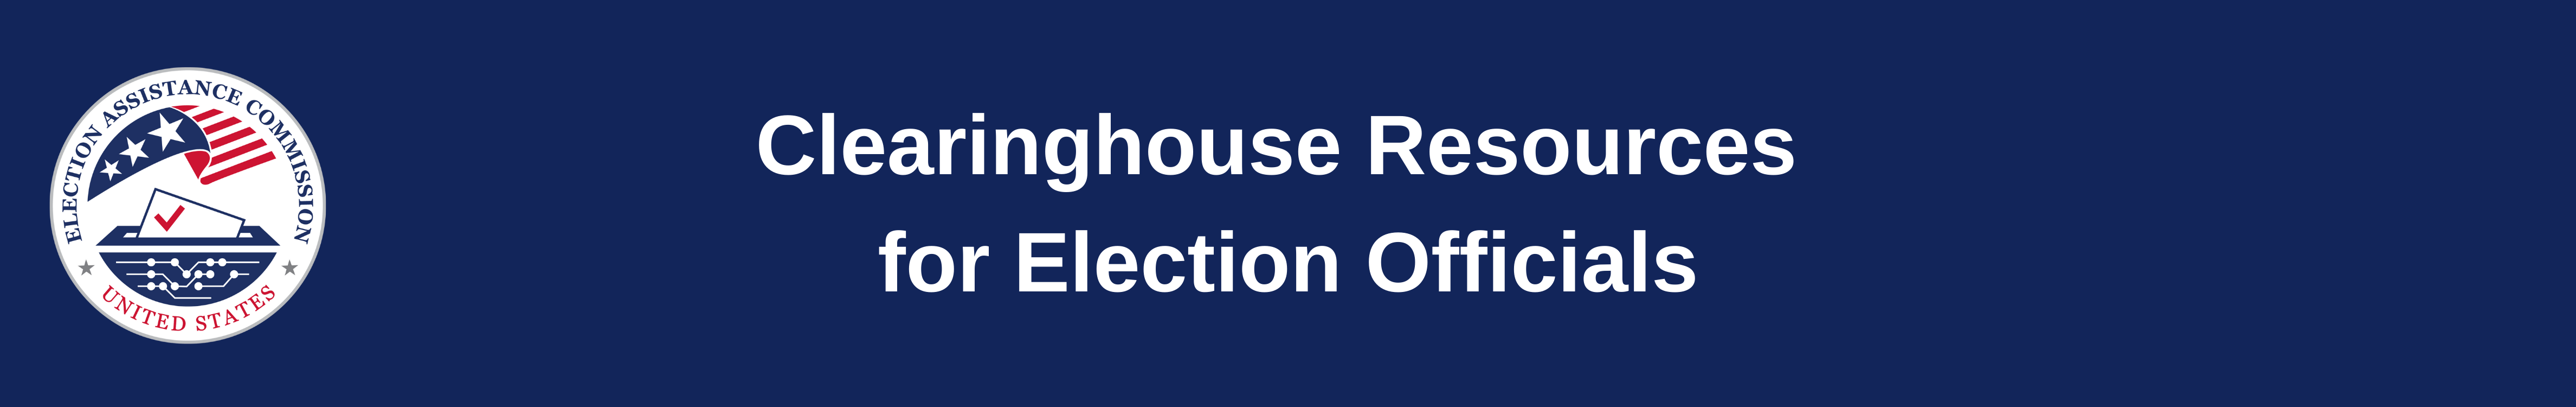 Clearinghouse Resources for Election Officials